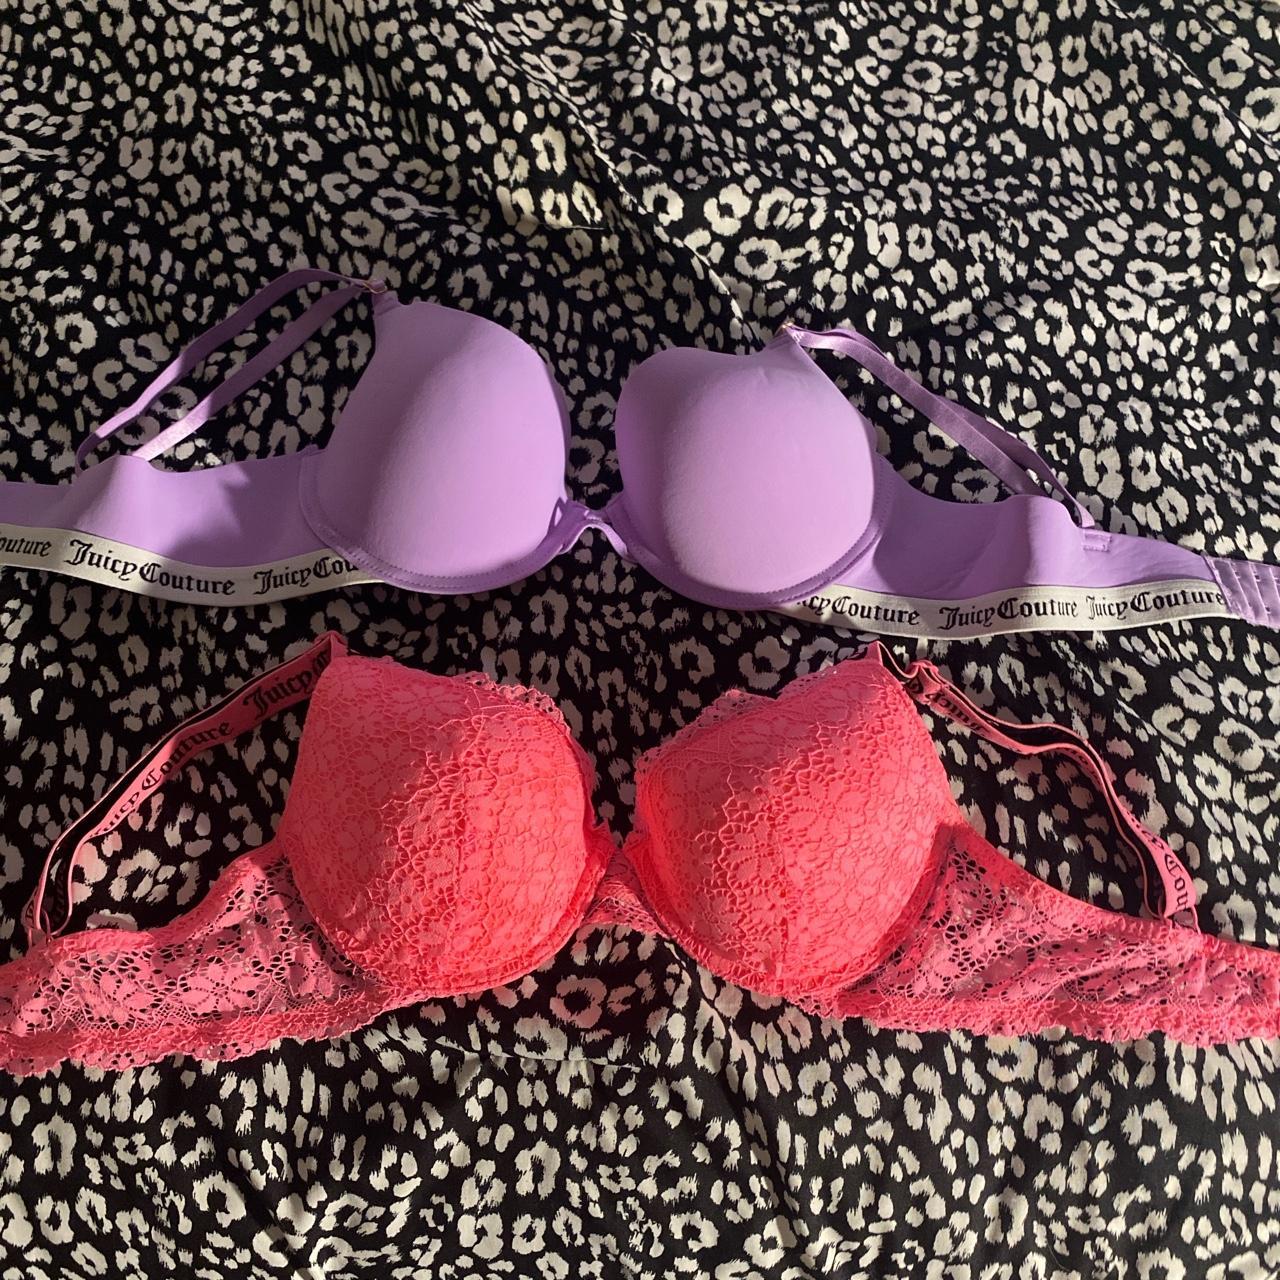 Juicy Couture push-up bras, So cute and flattering